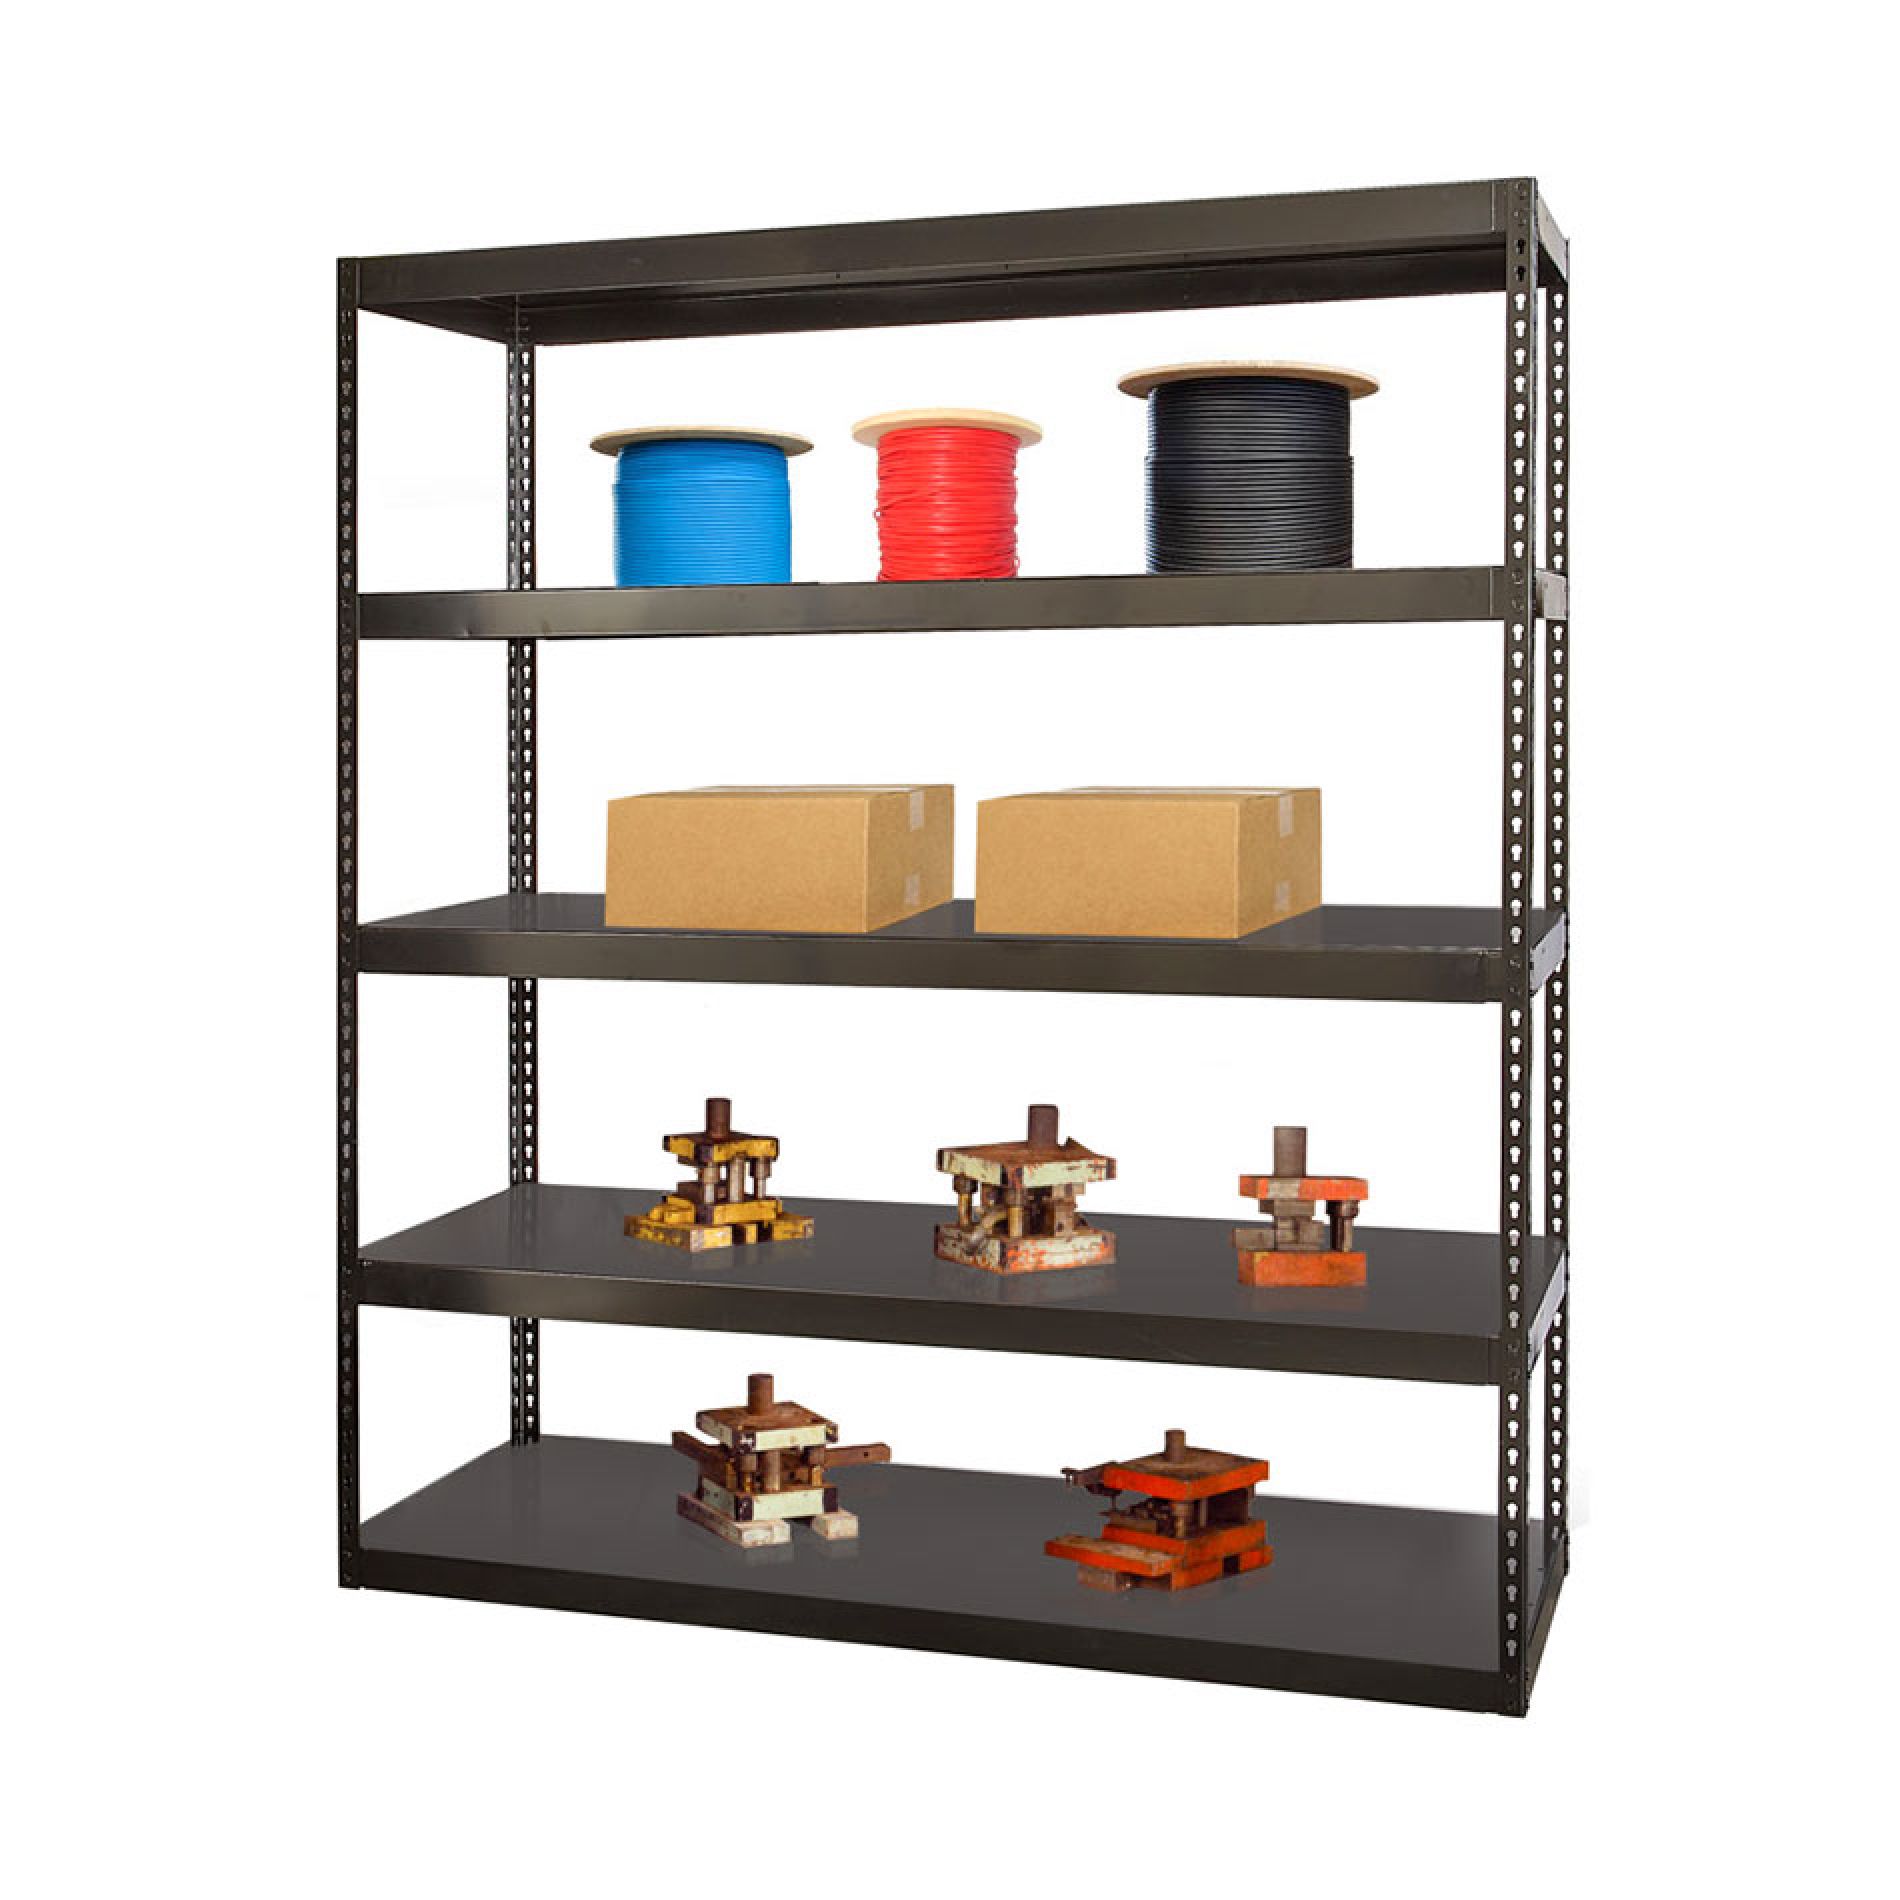 High-Capacity Reinforced Bolted Shelving